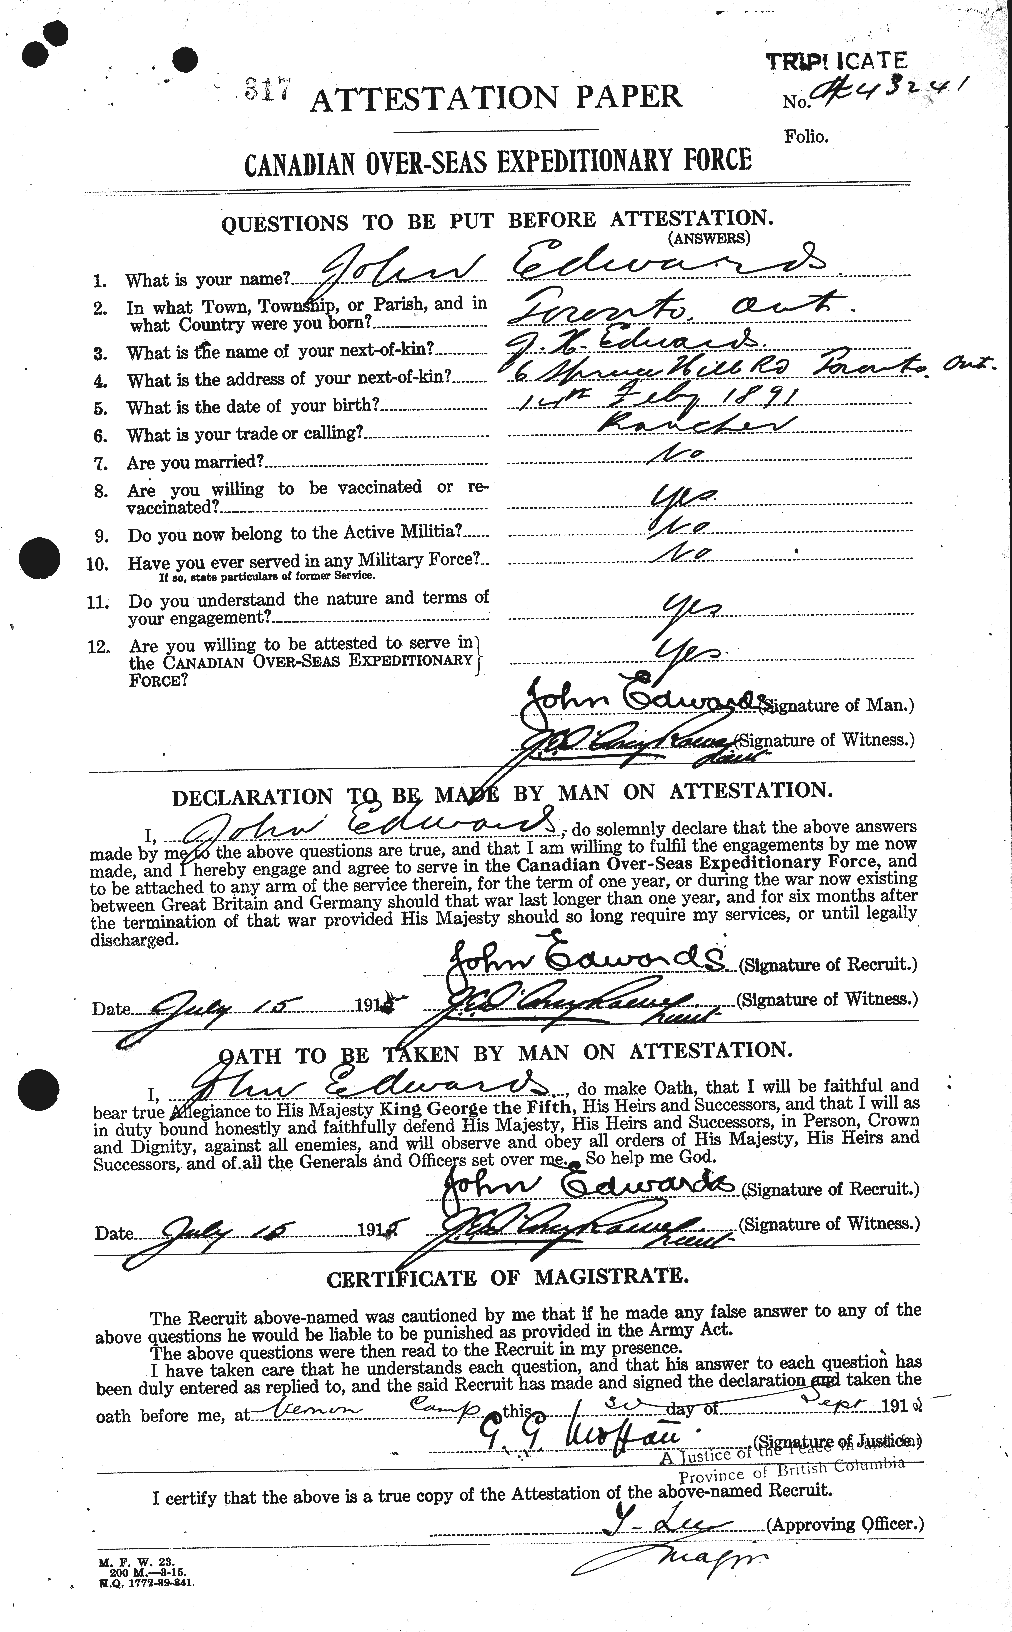 Personnel Records of the First World War - CEF 310116a